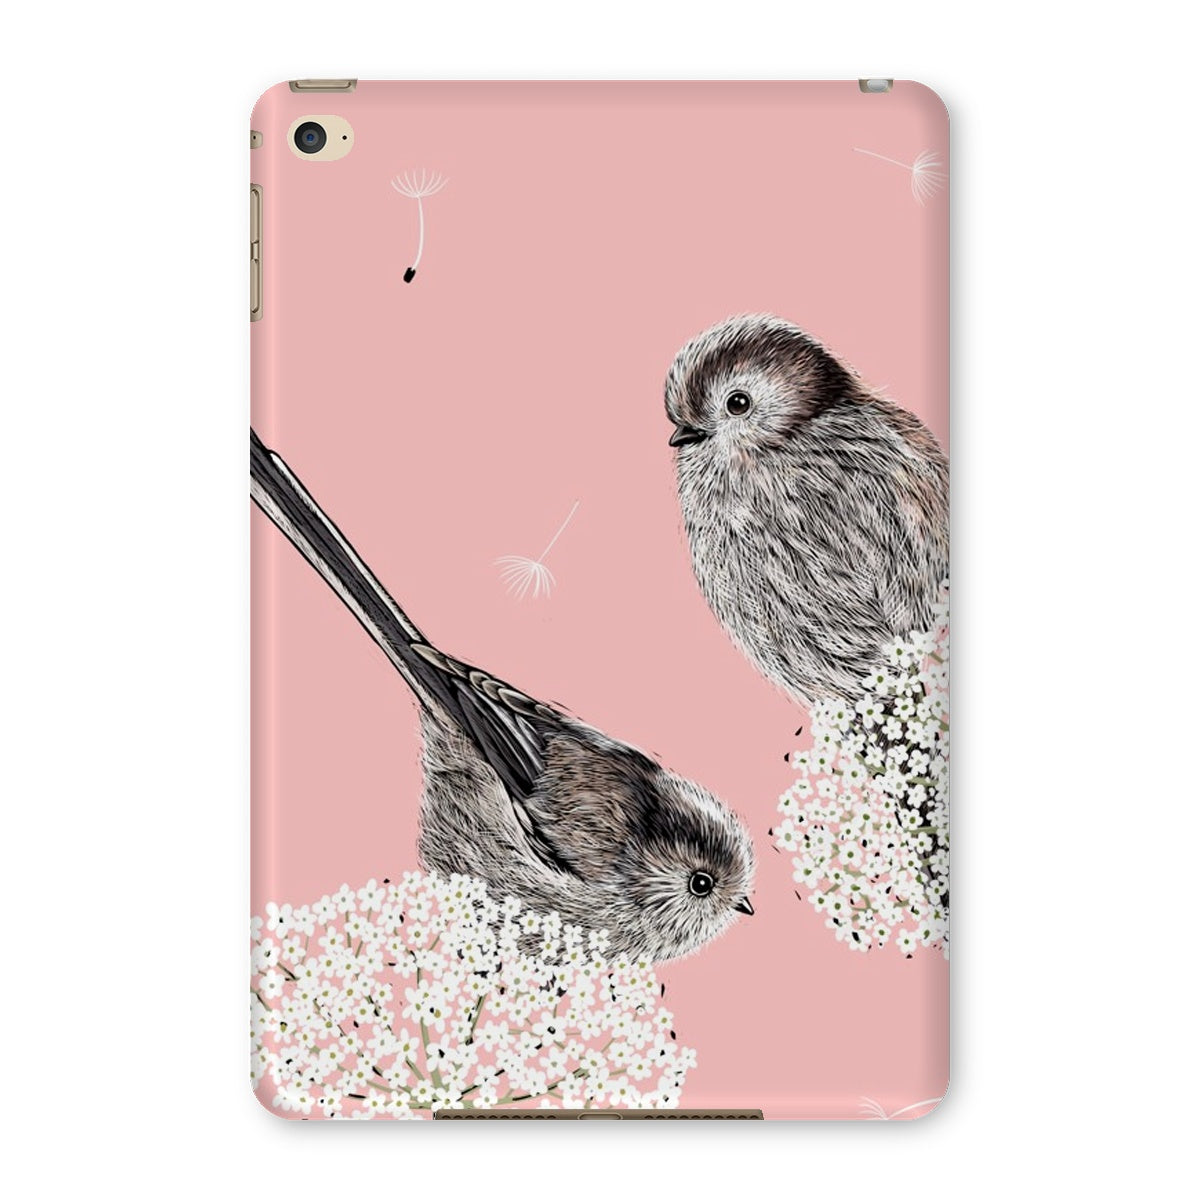 Long Tailed Tits Tablet Case - Salmon